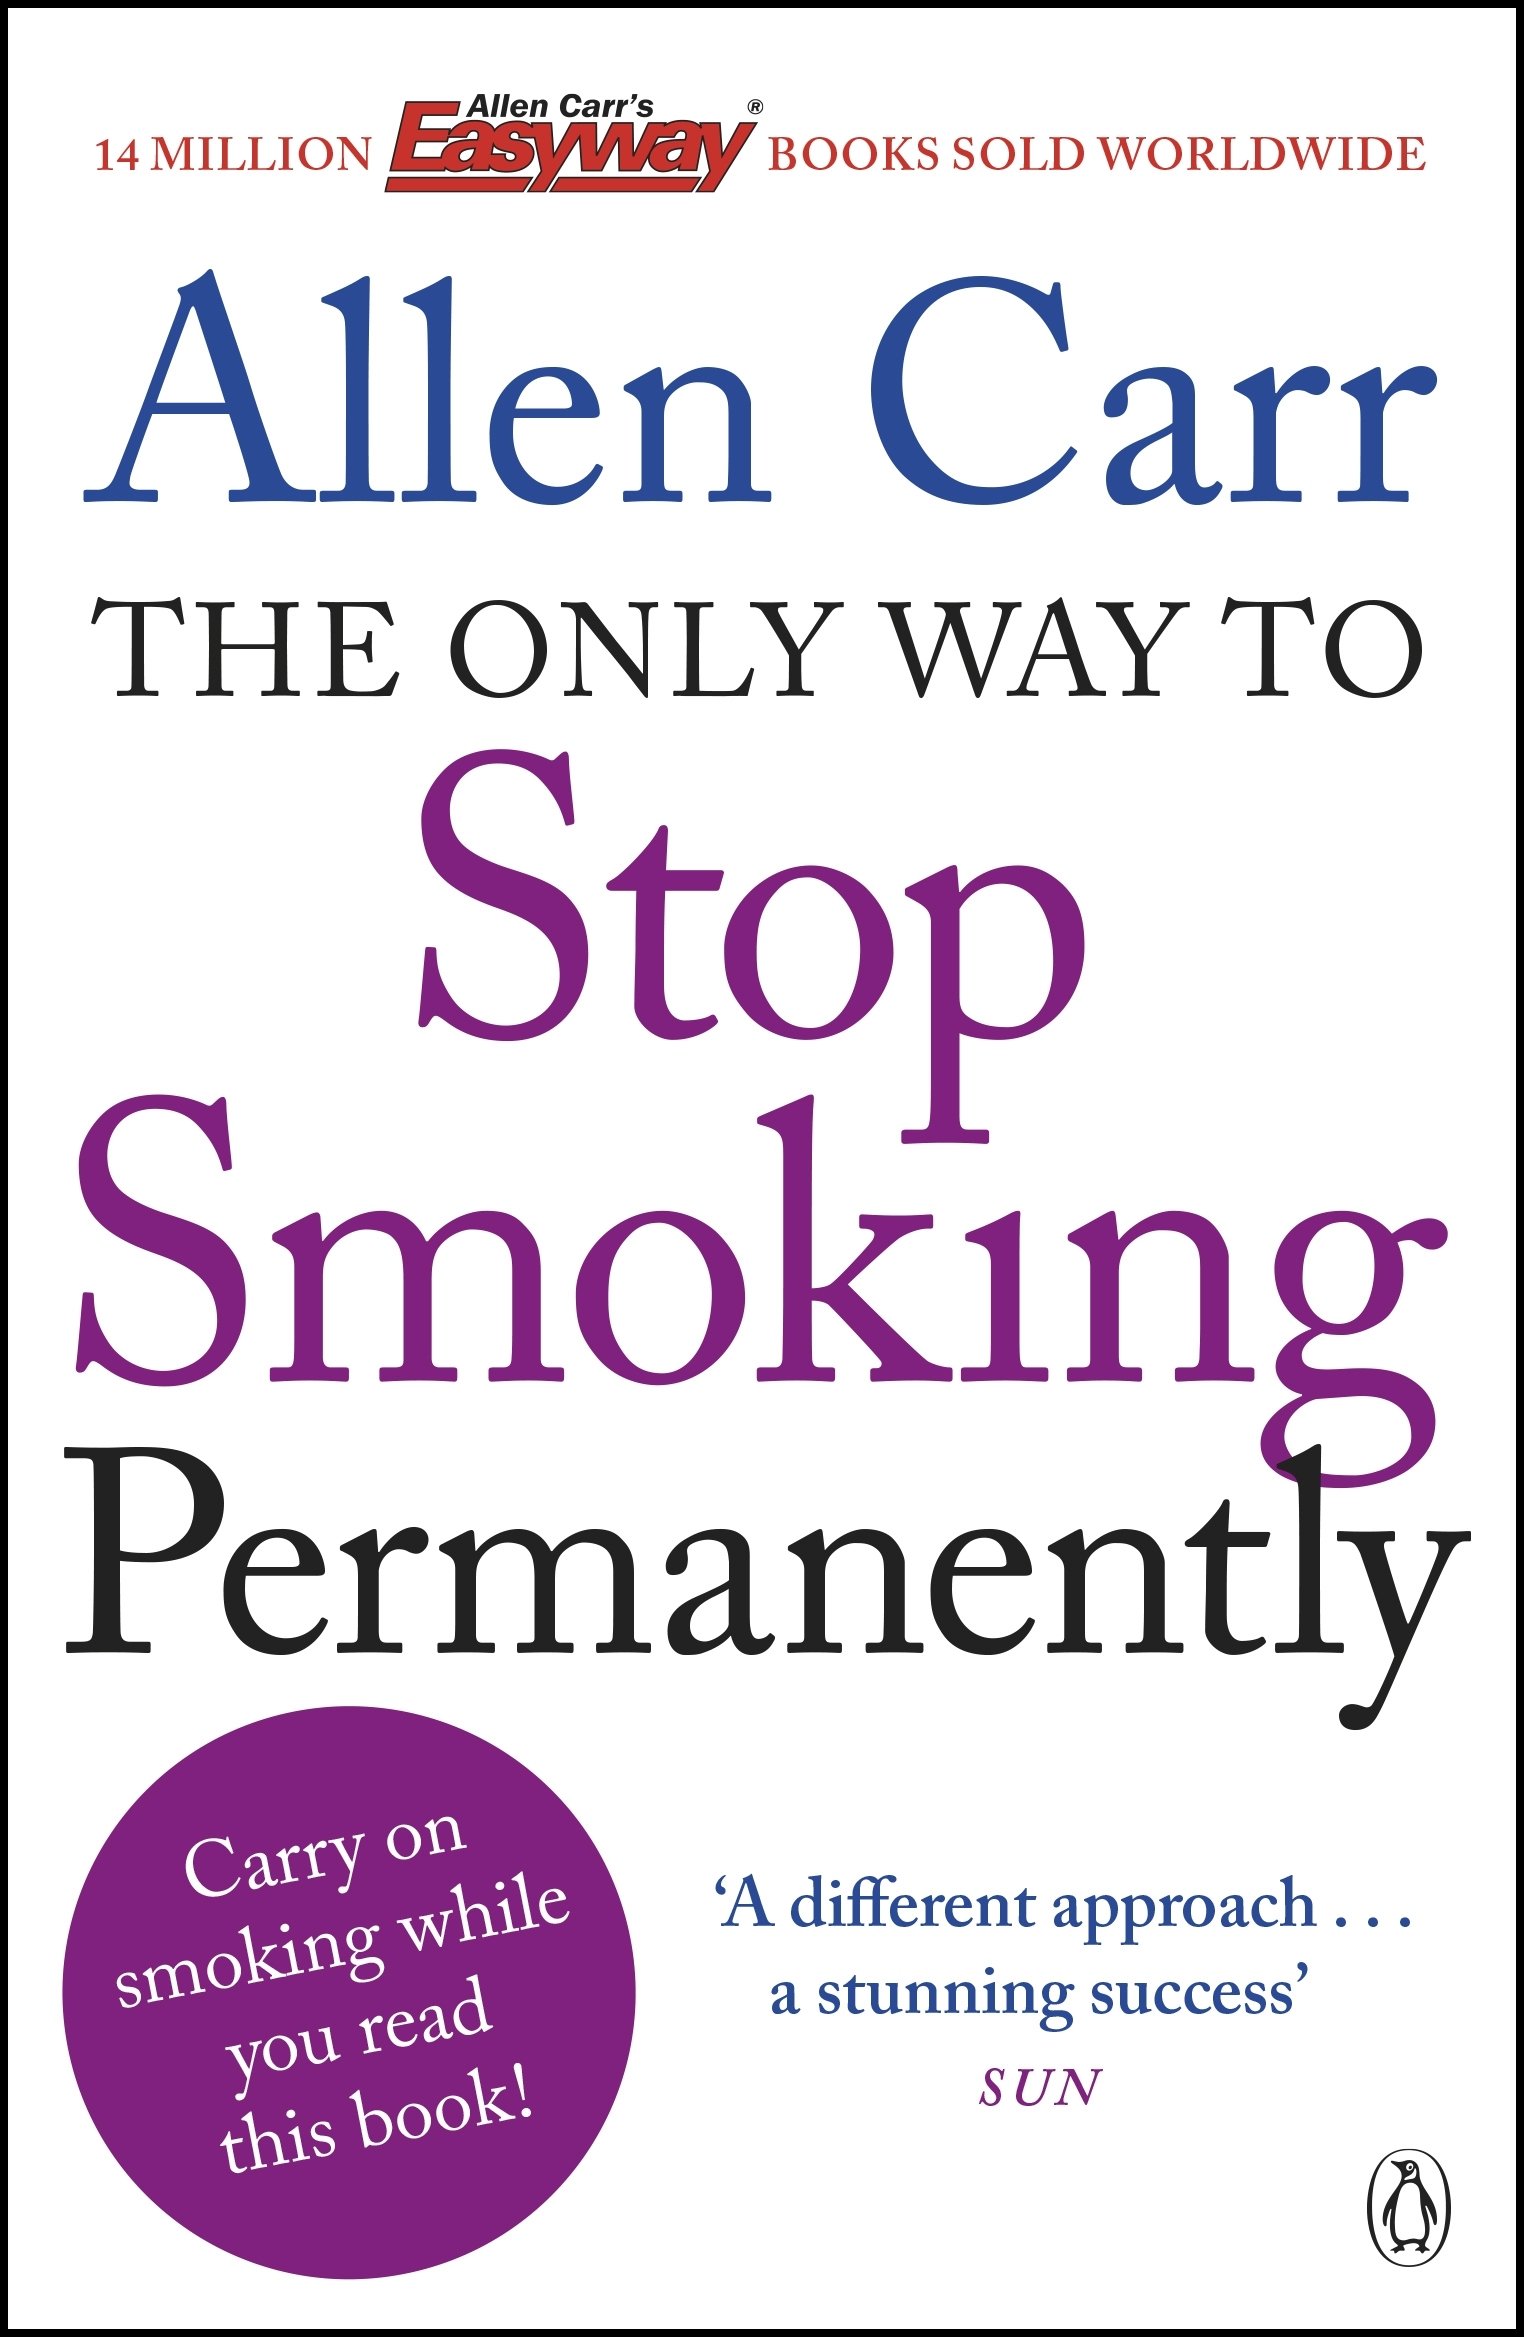 Allen Carr's The Only Way to Stop Smoking Permanently